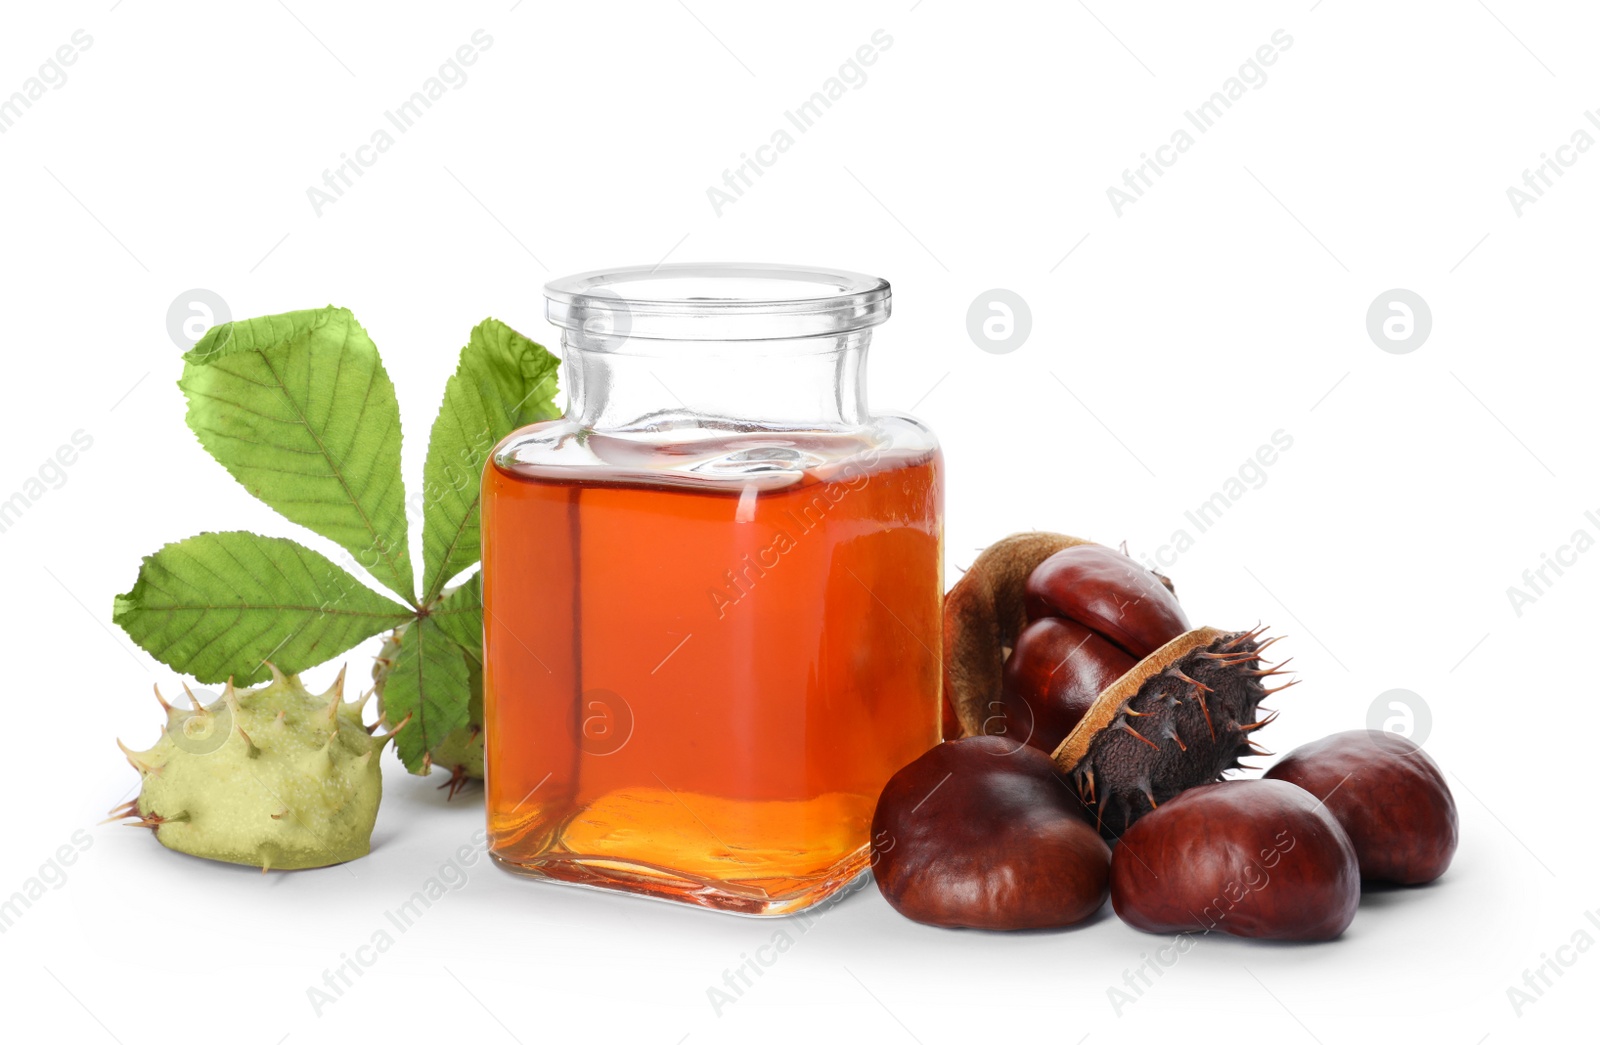 Photo of Horse chestnuts, bottle of tincture and green leaf on white background